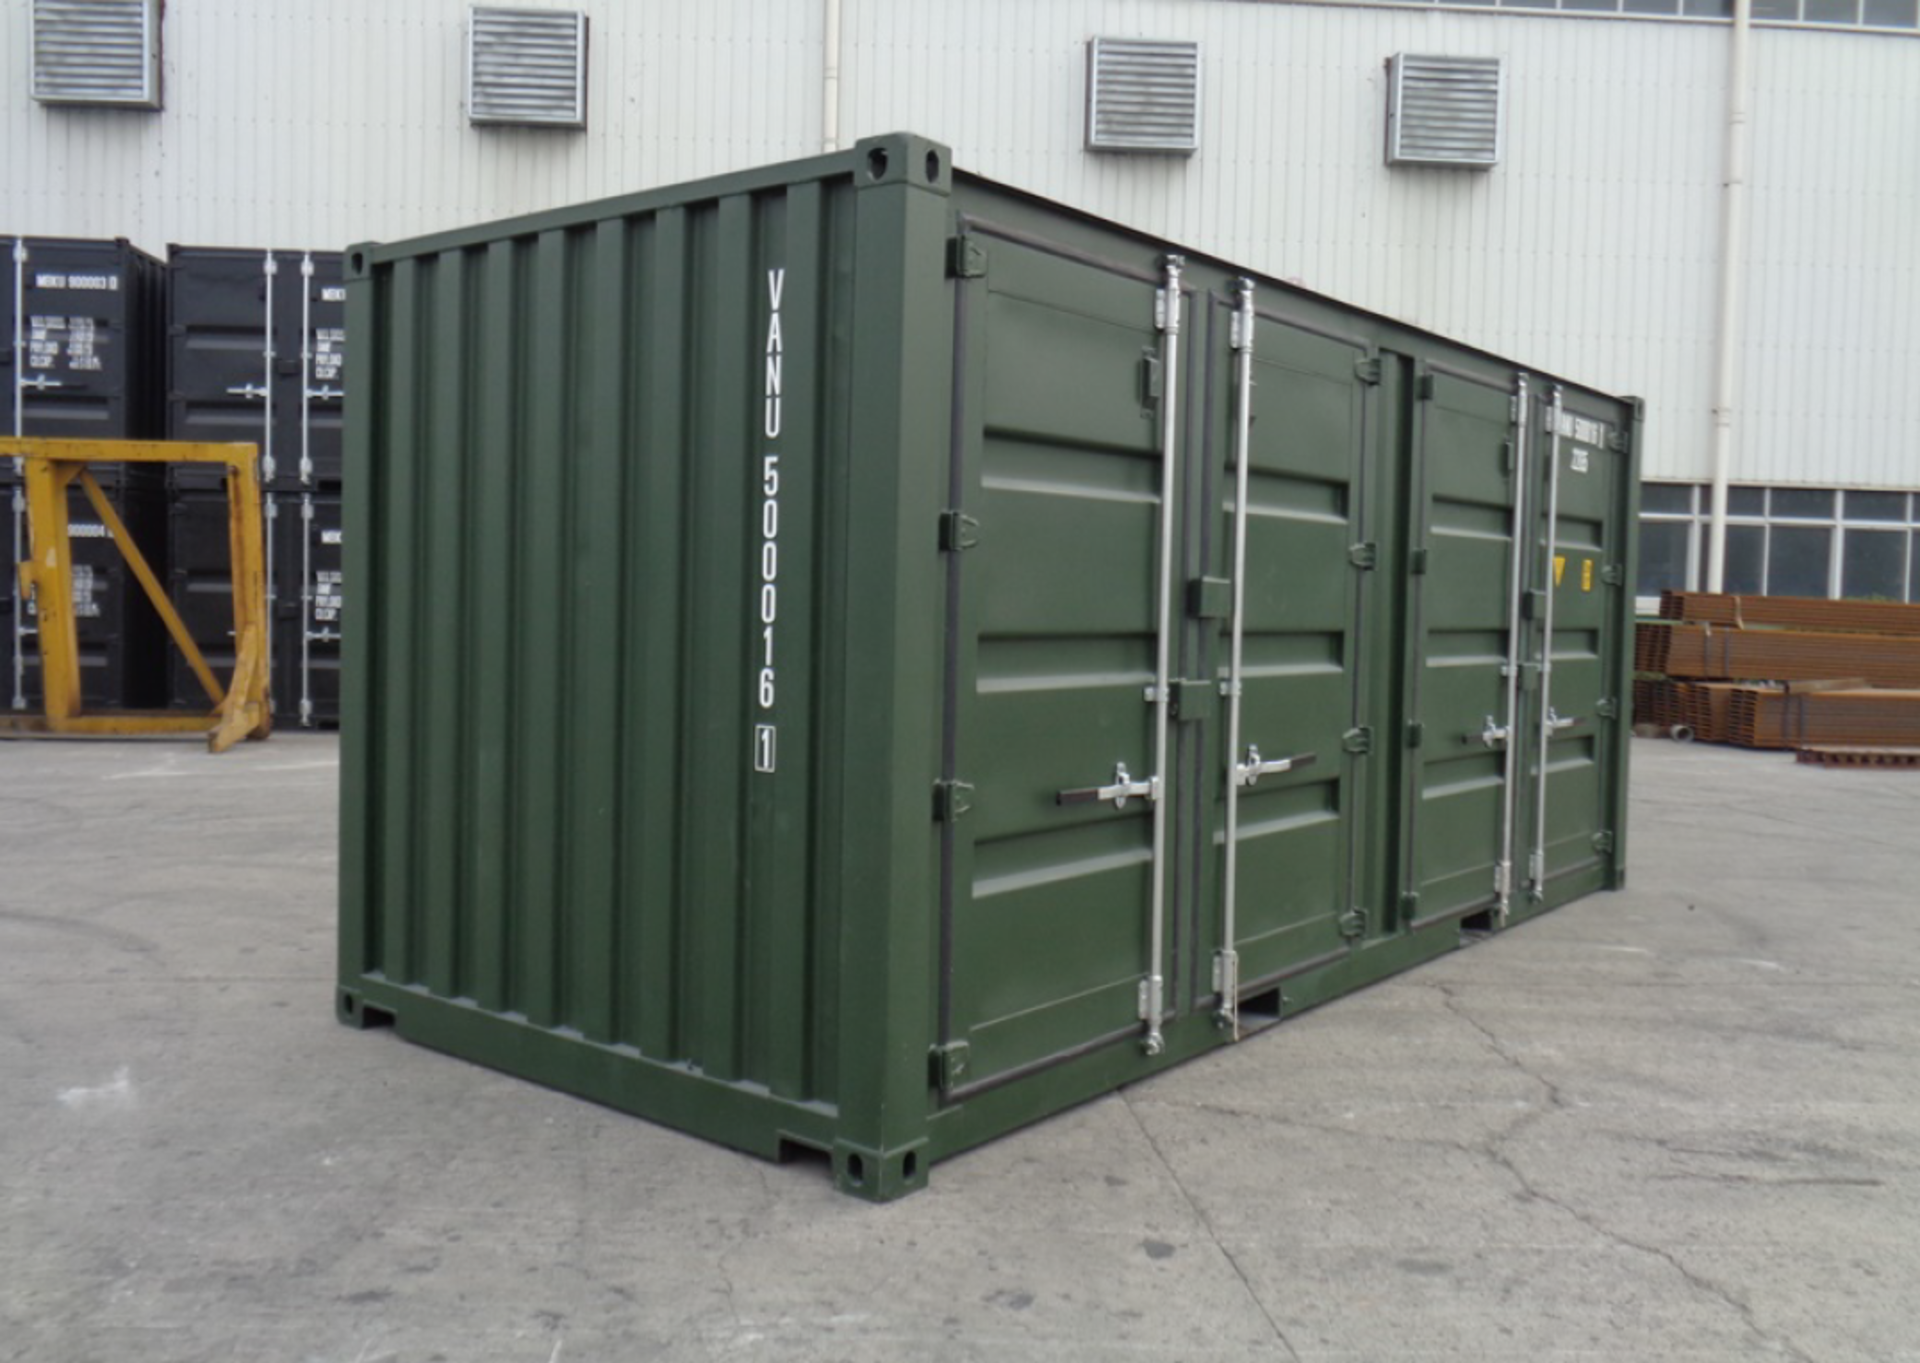 One Trip 20ft Multi Compartmentalised Shipping Container (4 rooms) - Image 2 of 7